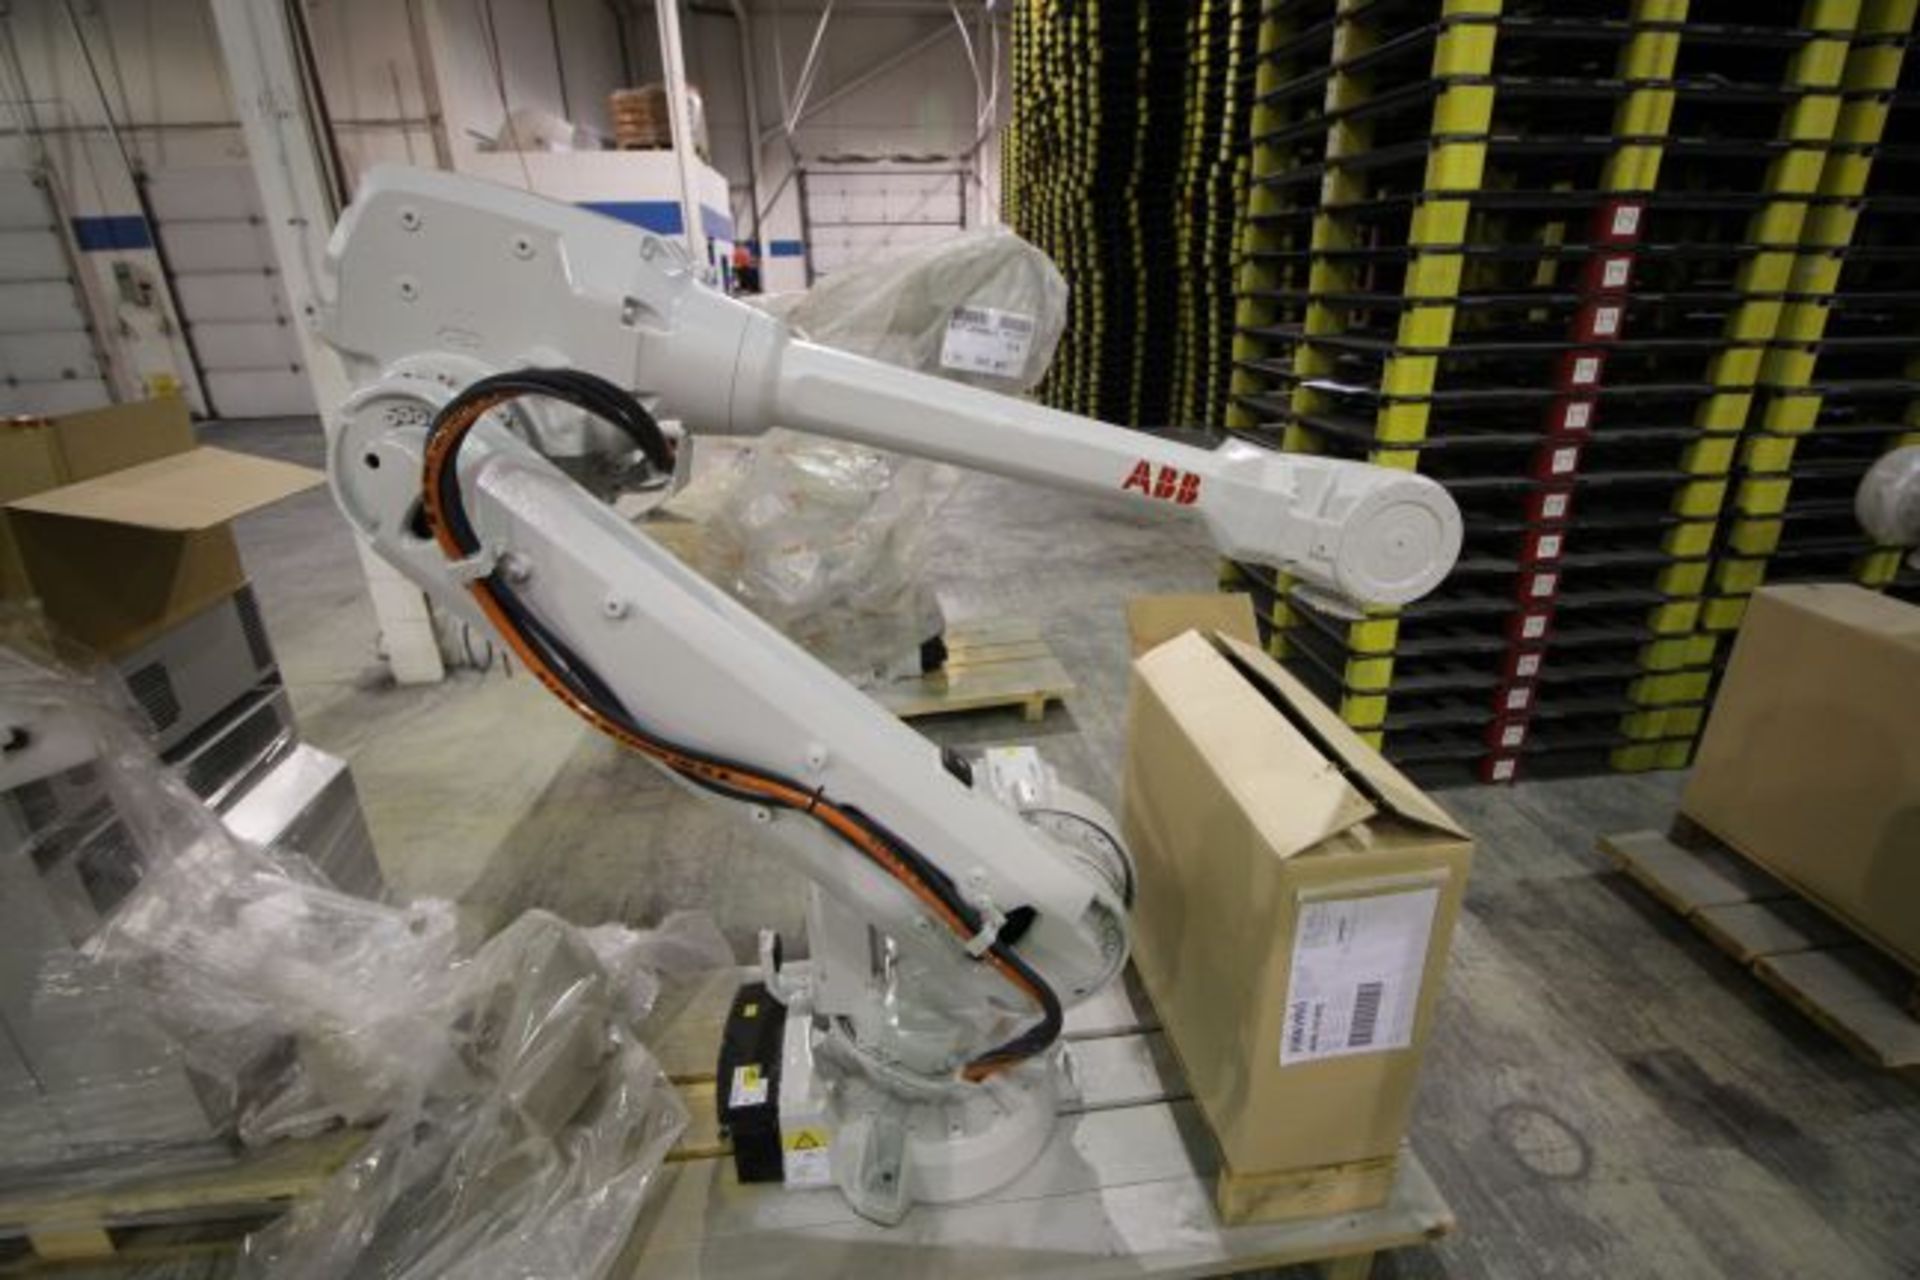 (NEW) ABB ROBOT IRB 4600 2.55/40KG WITH IRC5 CONTROLS, YEAR 2014, SN 101892 TEACH PENDANT& CABLES